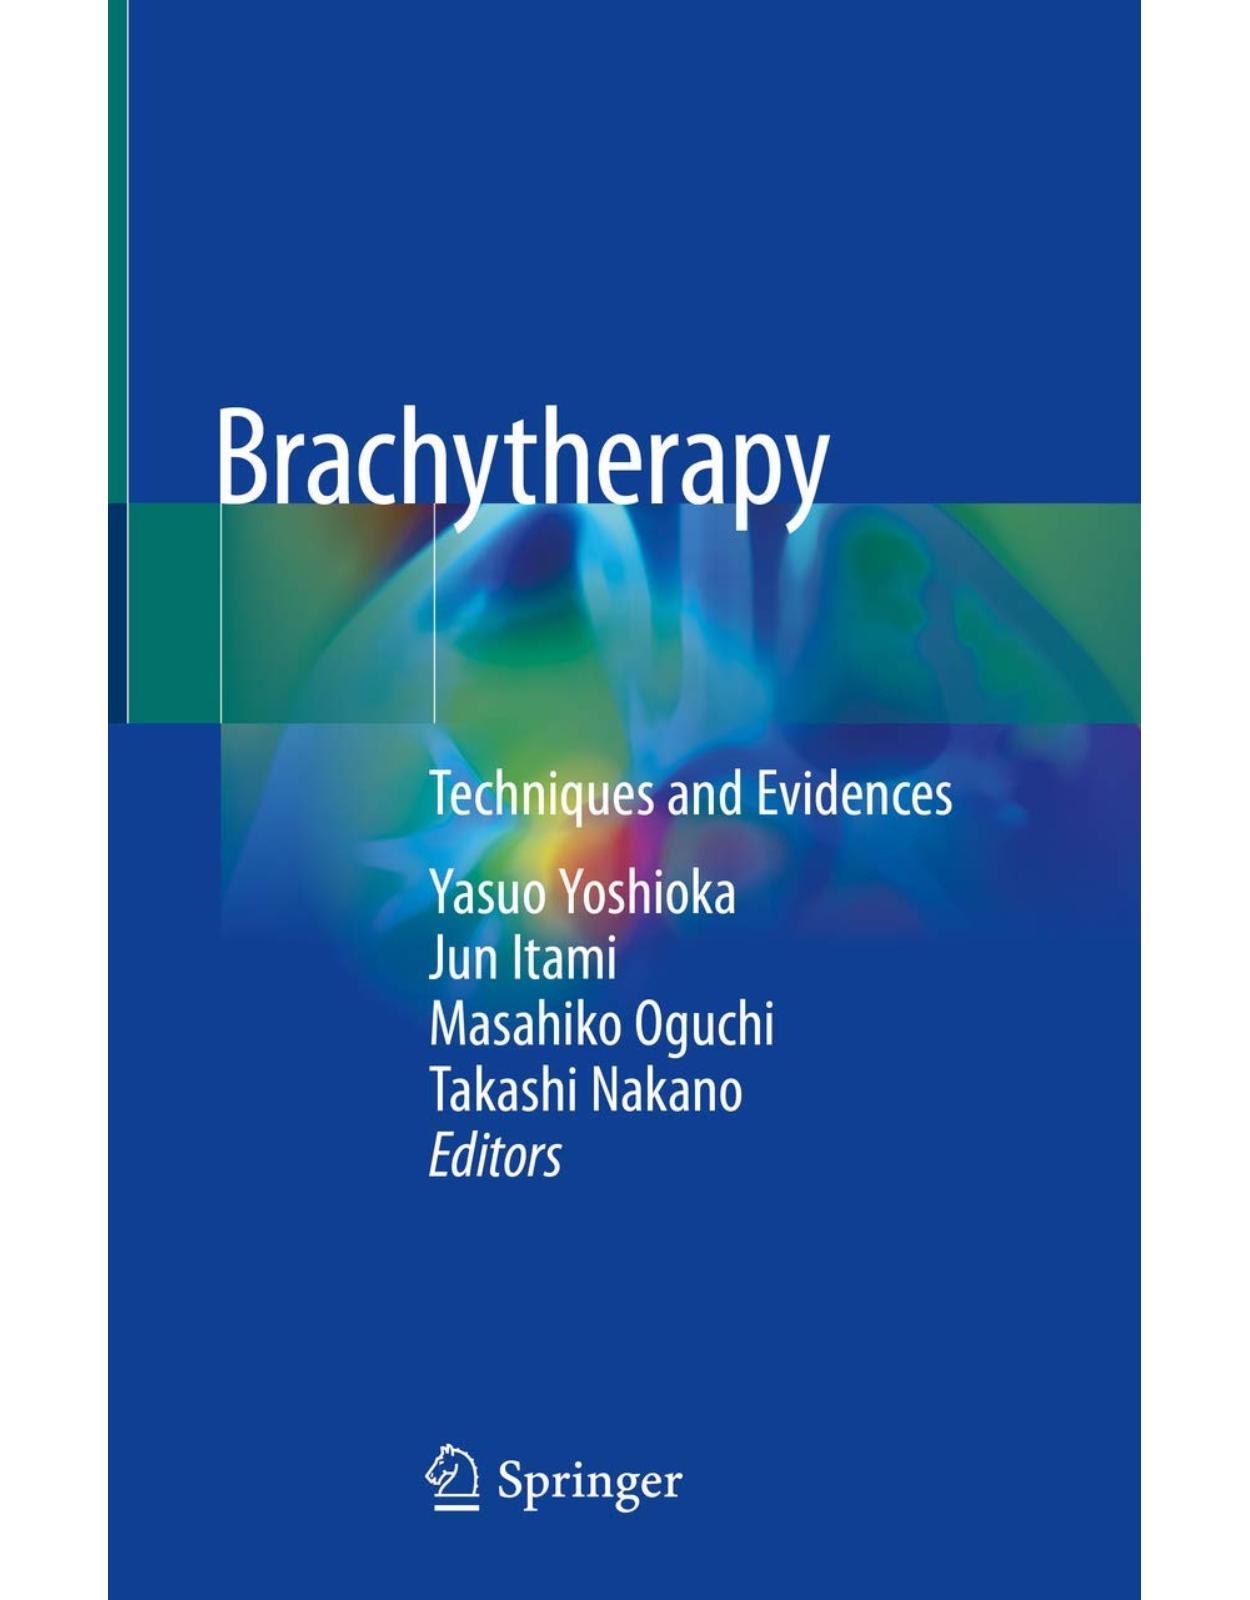 Brachytherapy: Techniques and Evidences 